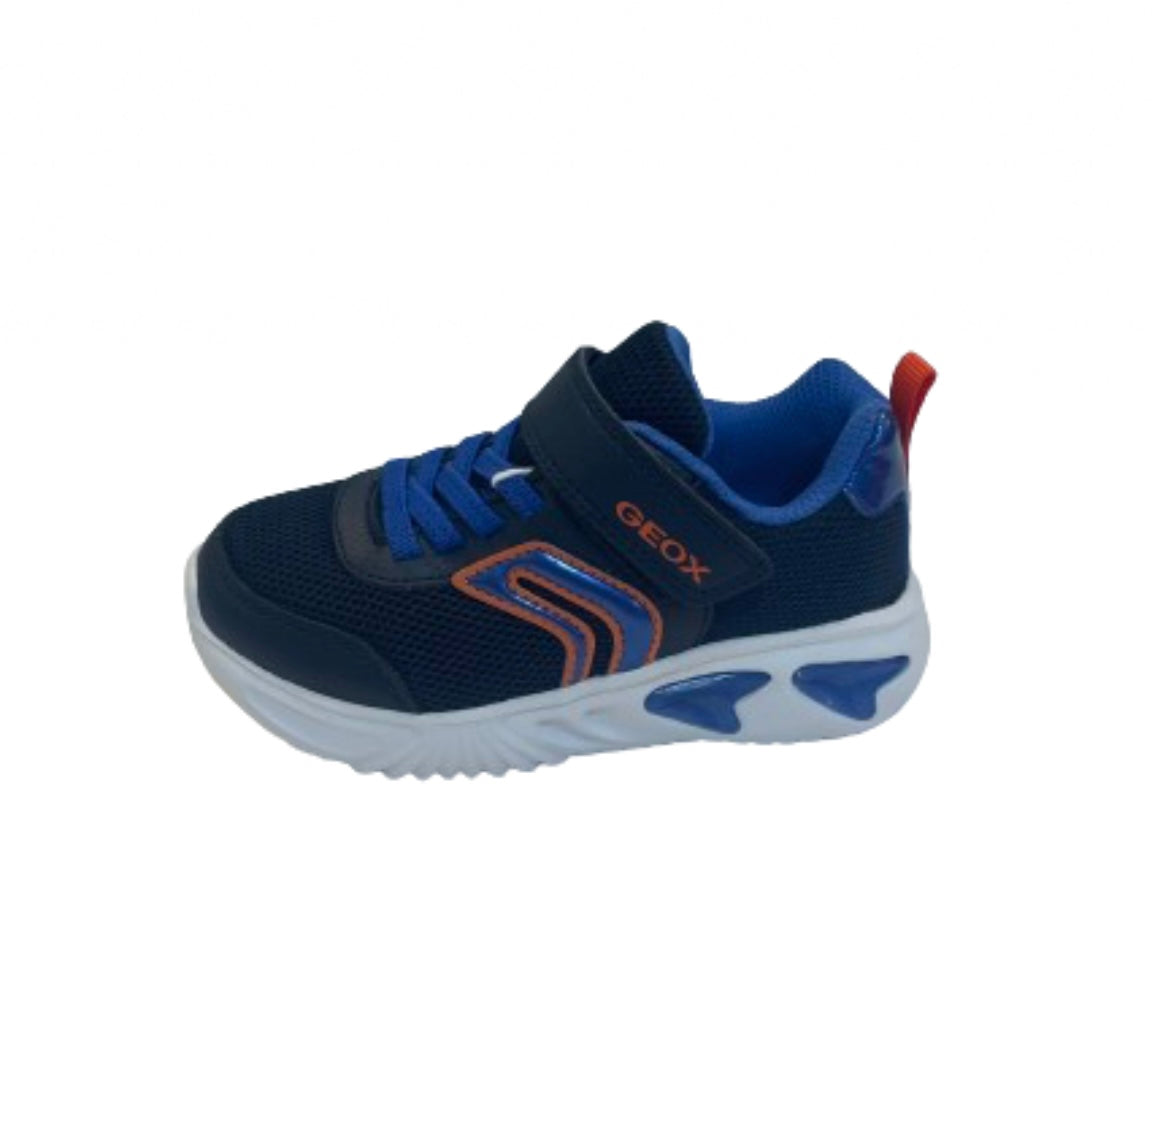 Geox blue J Assister trainer